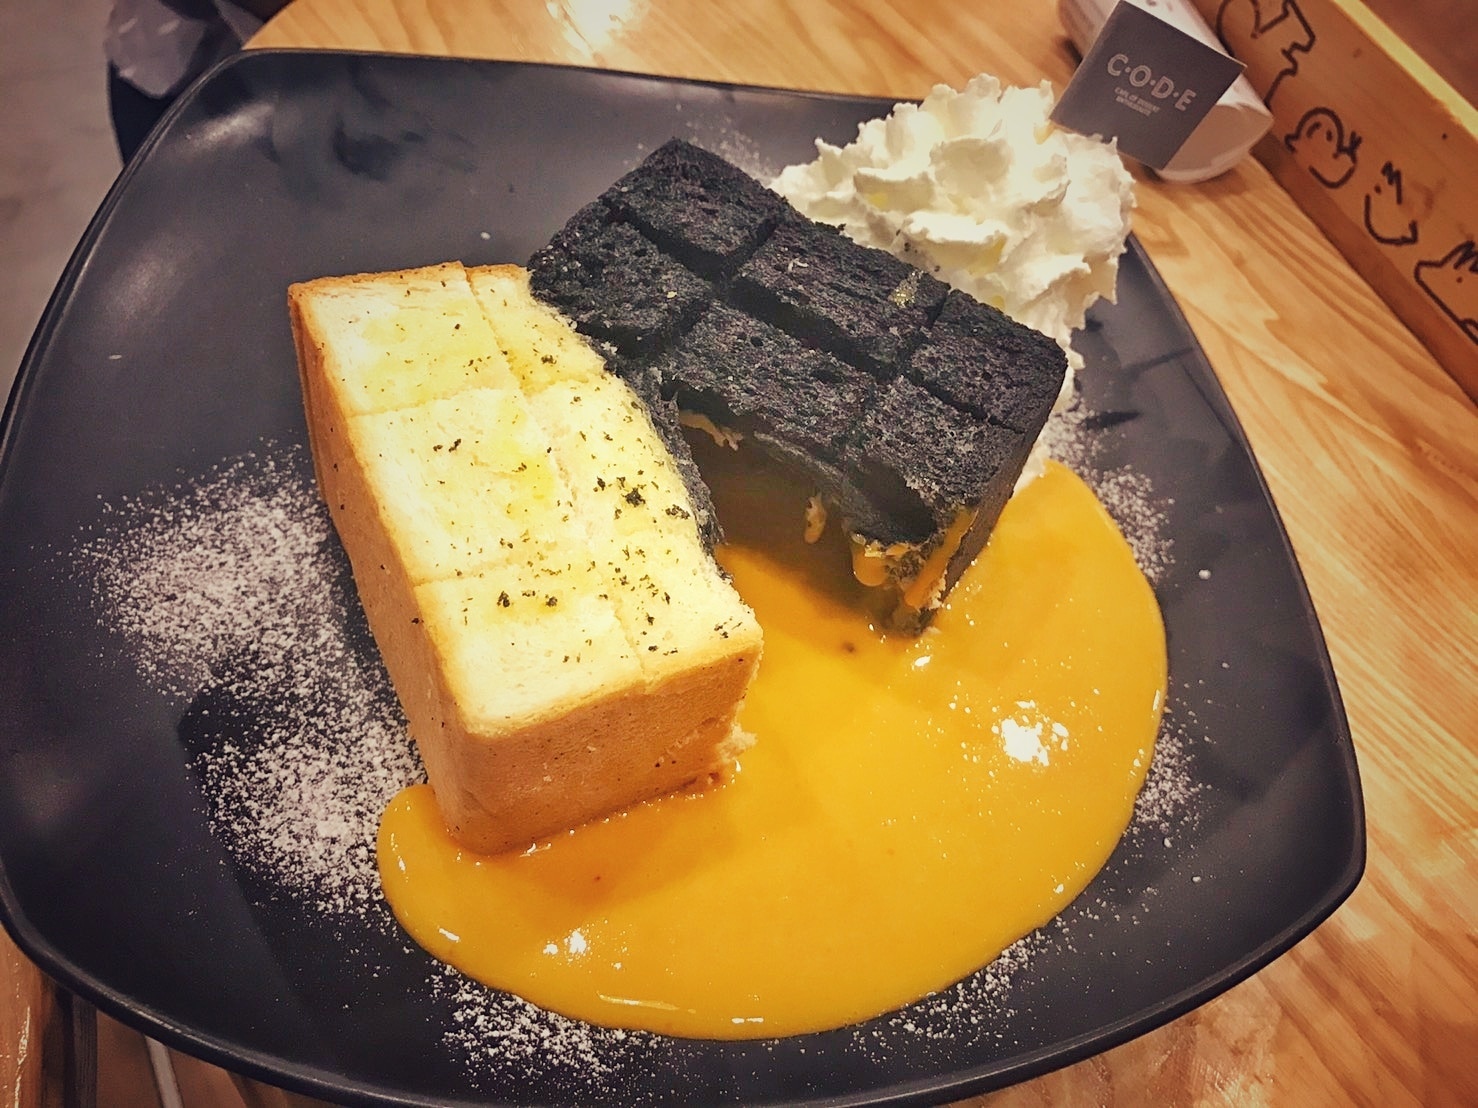 Salted Egg Yolk with Toast is good combination ever!. You can try at CODE Cafe at Mega Bangna
#lifeatexpedia